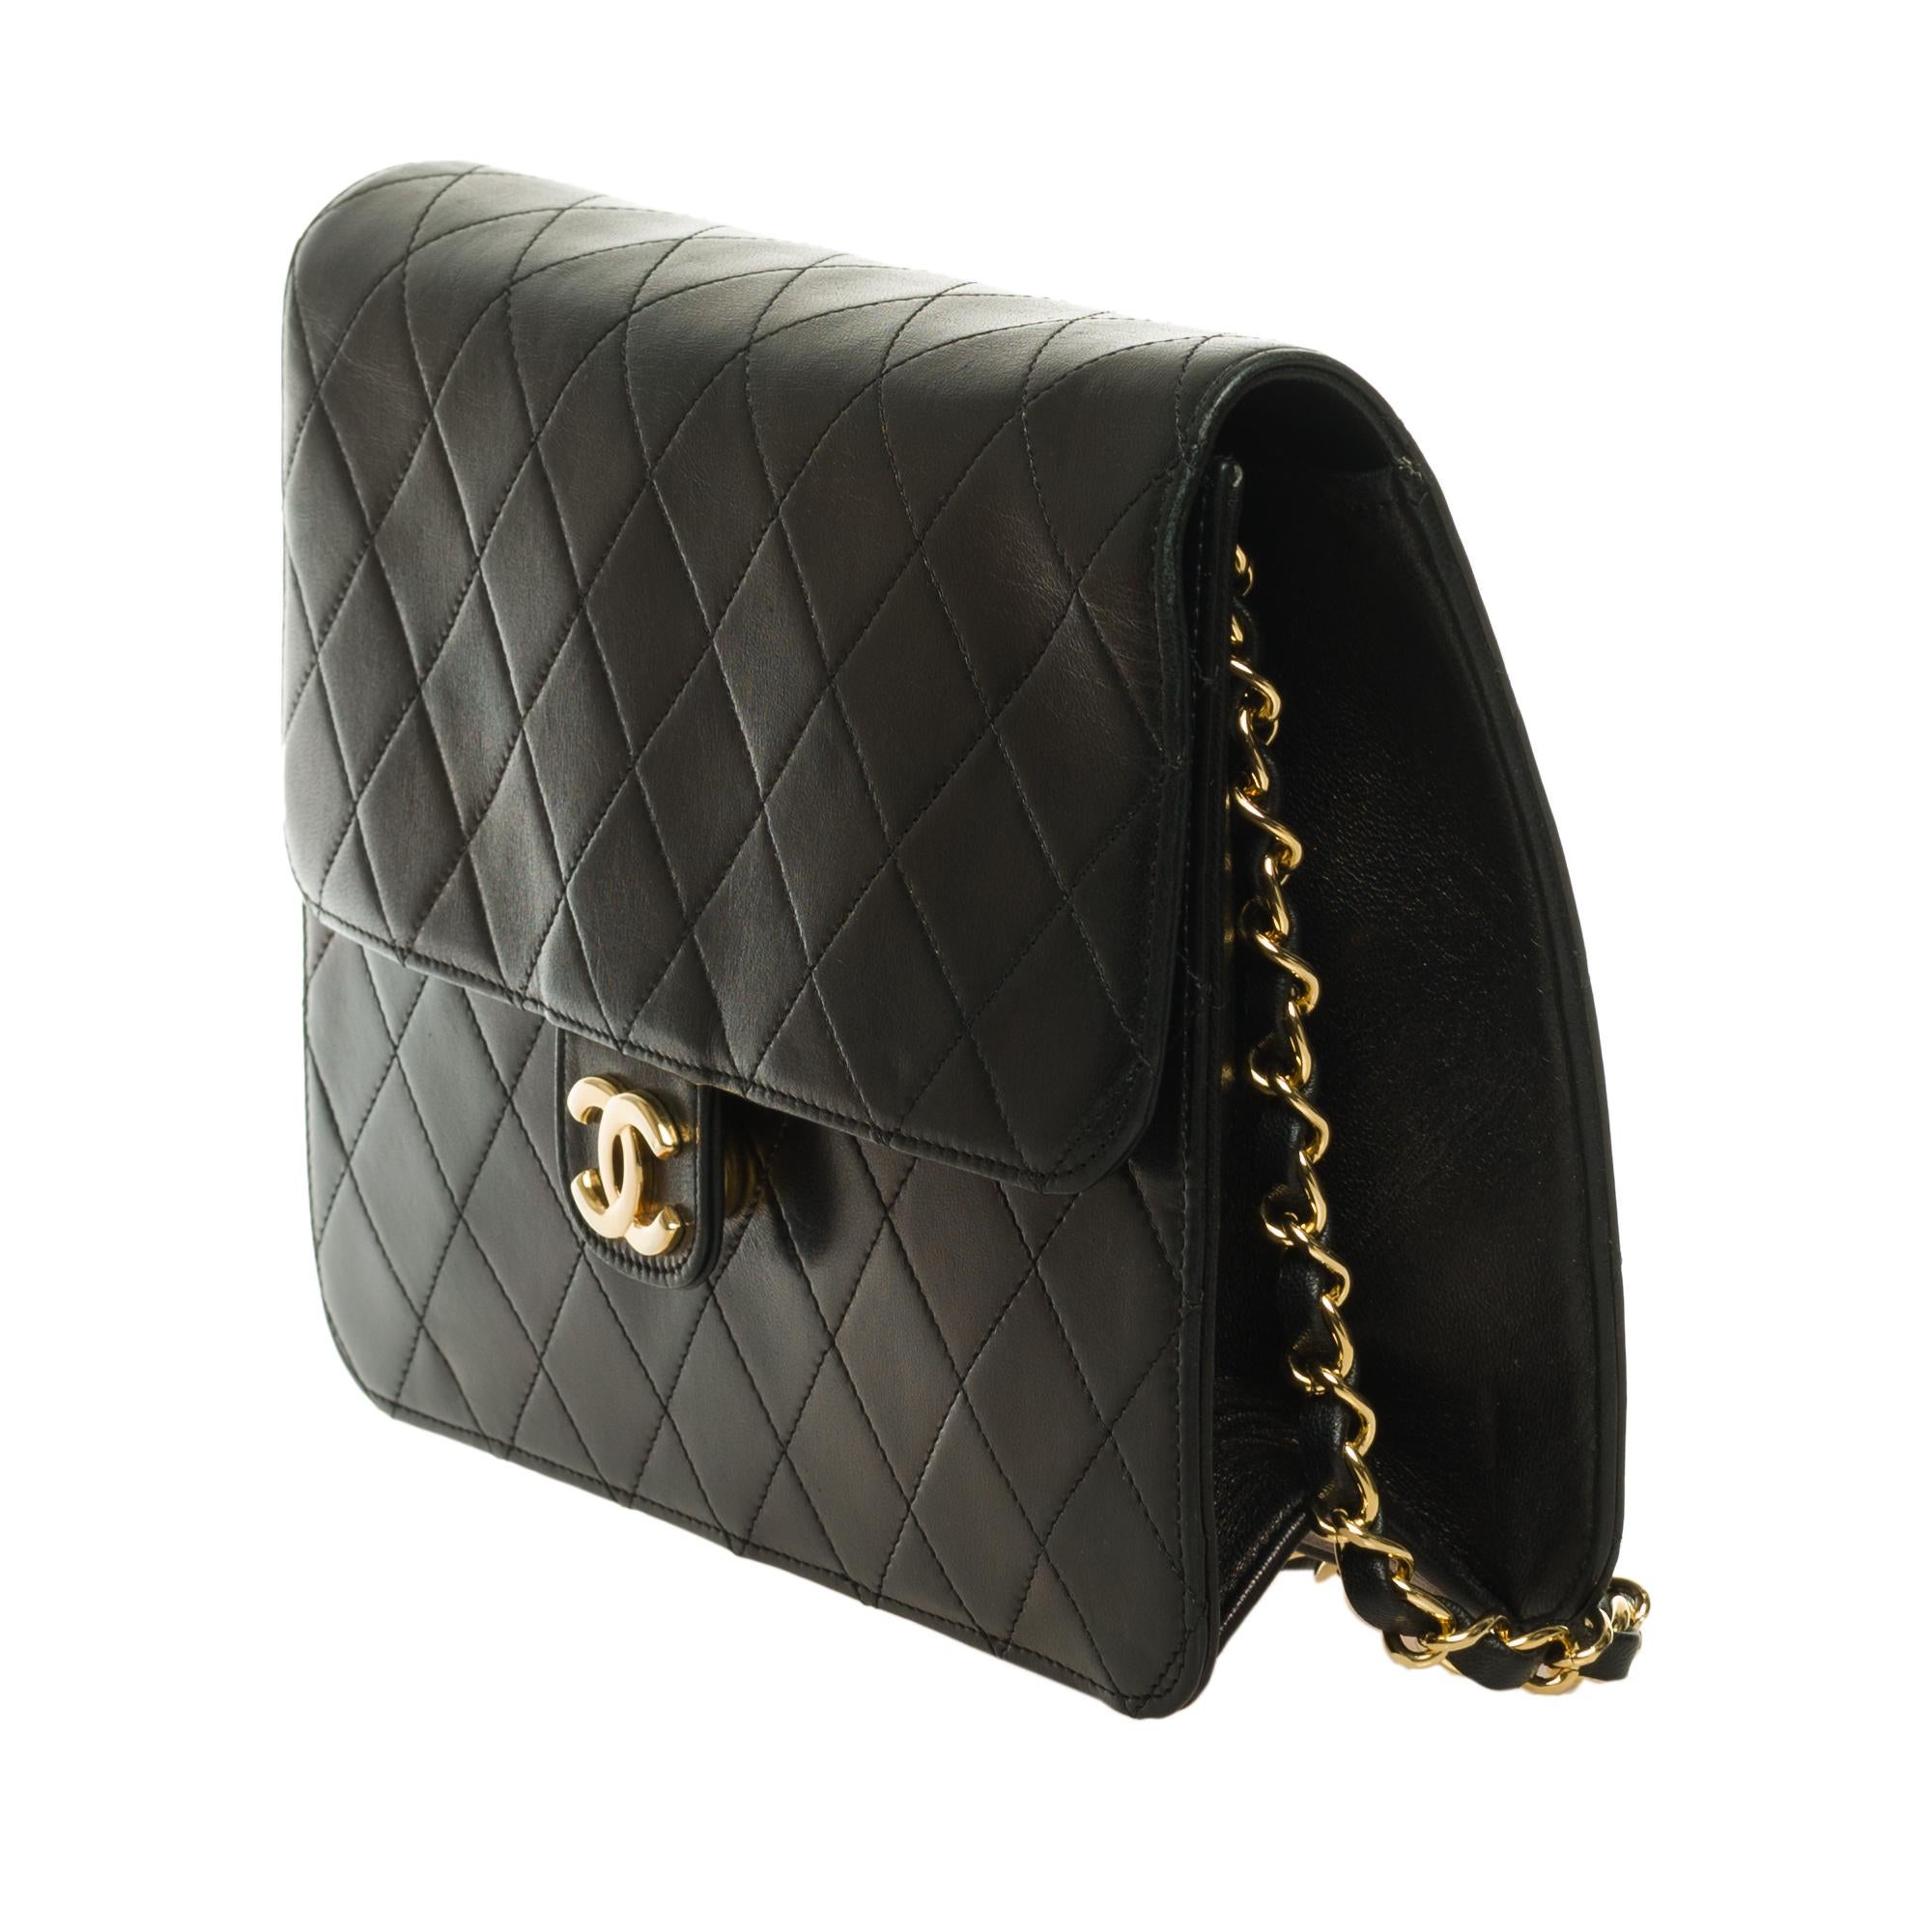 Black Stunning Chanel Classic shoulder bag in black quilted lambskin and gold hardware